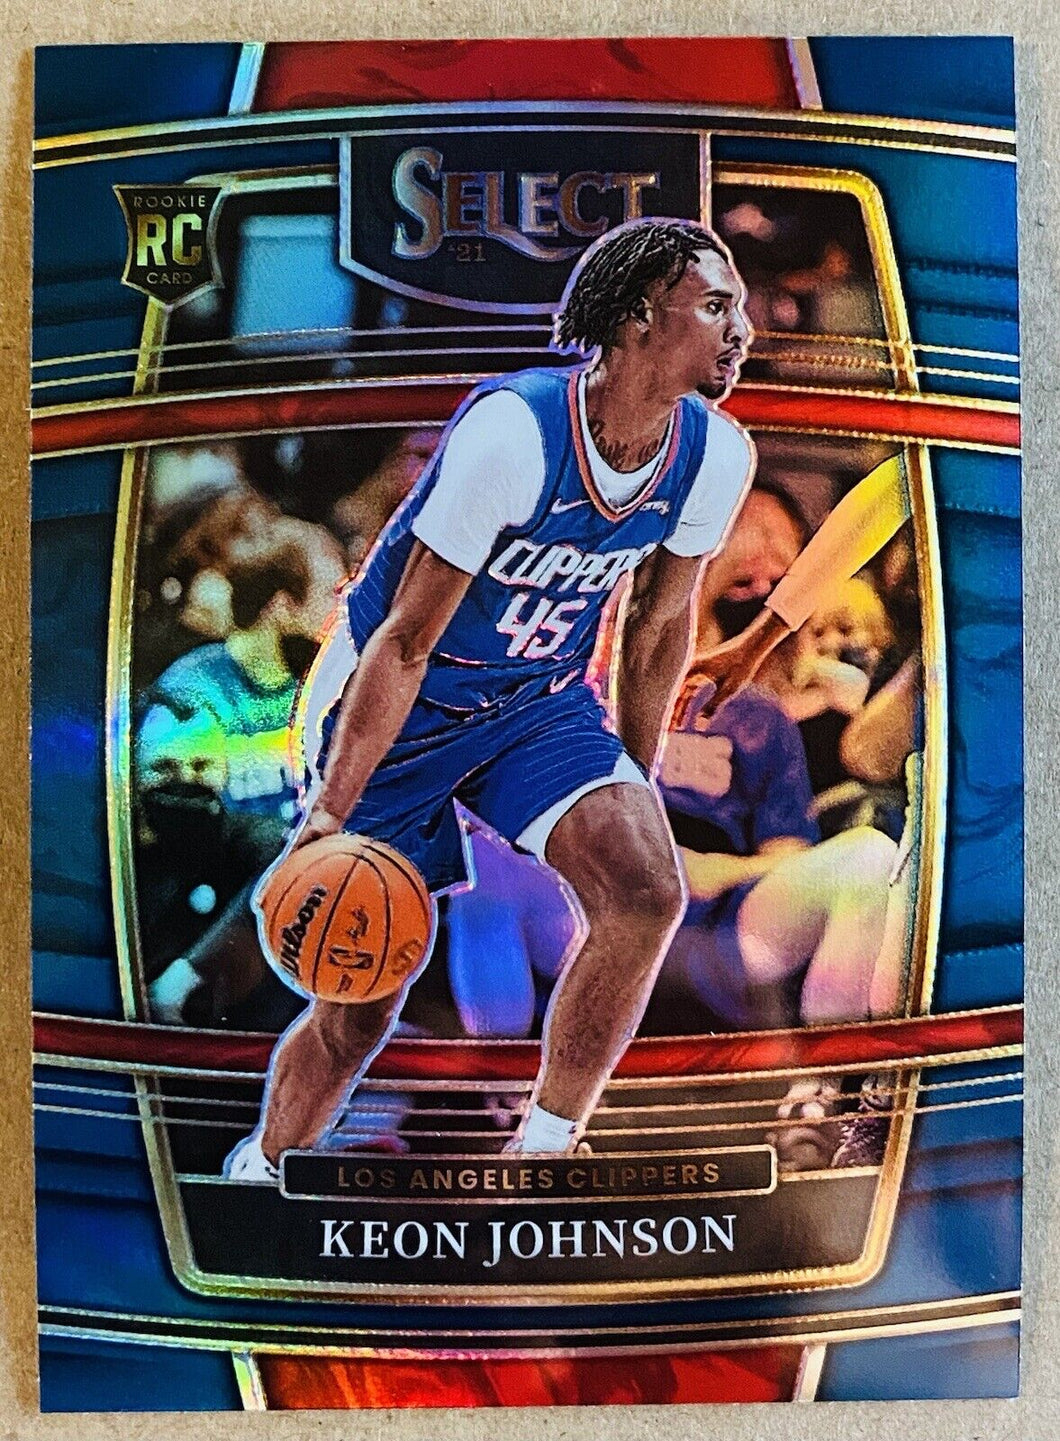 2021-22 Panini Select Keon Johnson Rookies Blue Prizm 40 Los Angeles Clippers